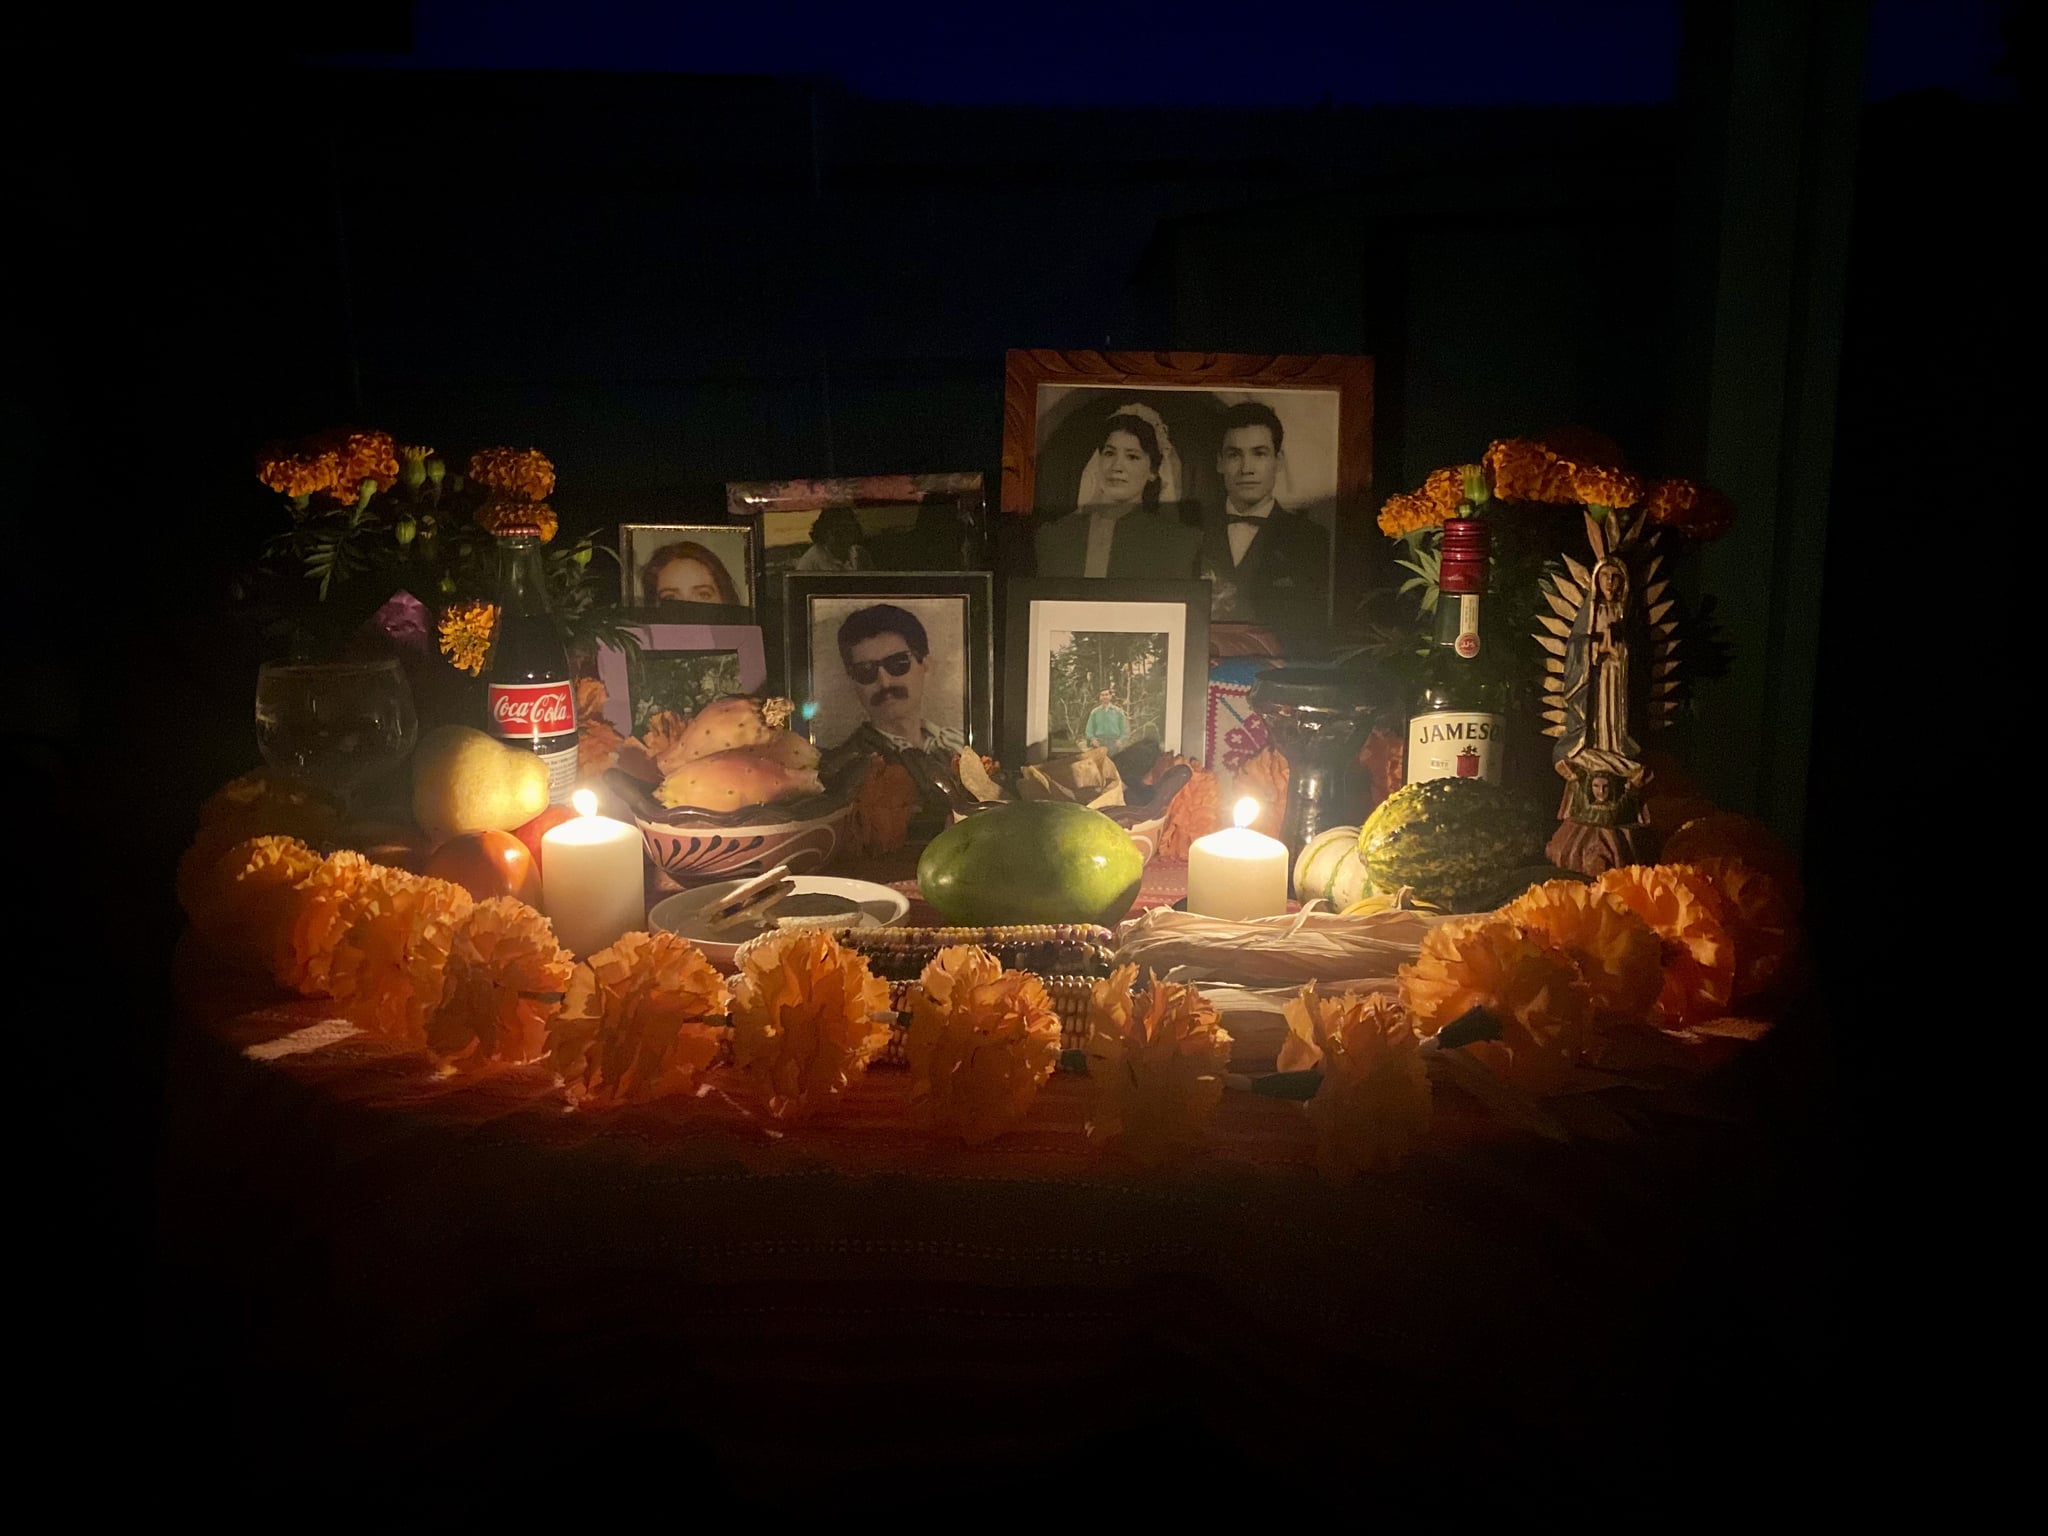 Ofrendas by Yvette Montoya feature Coca-Cola and Jameson